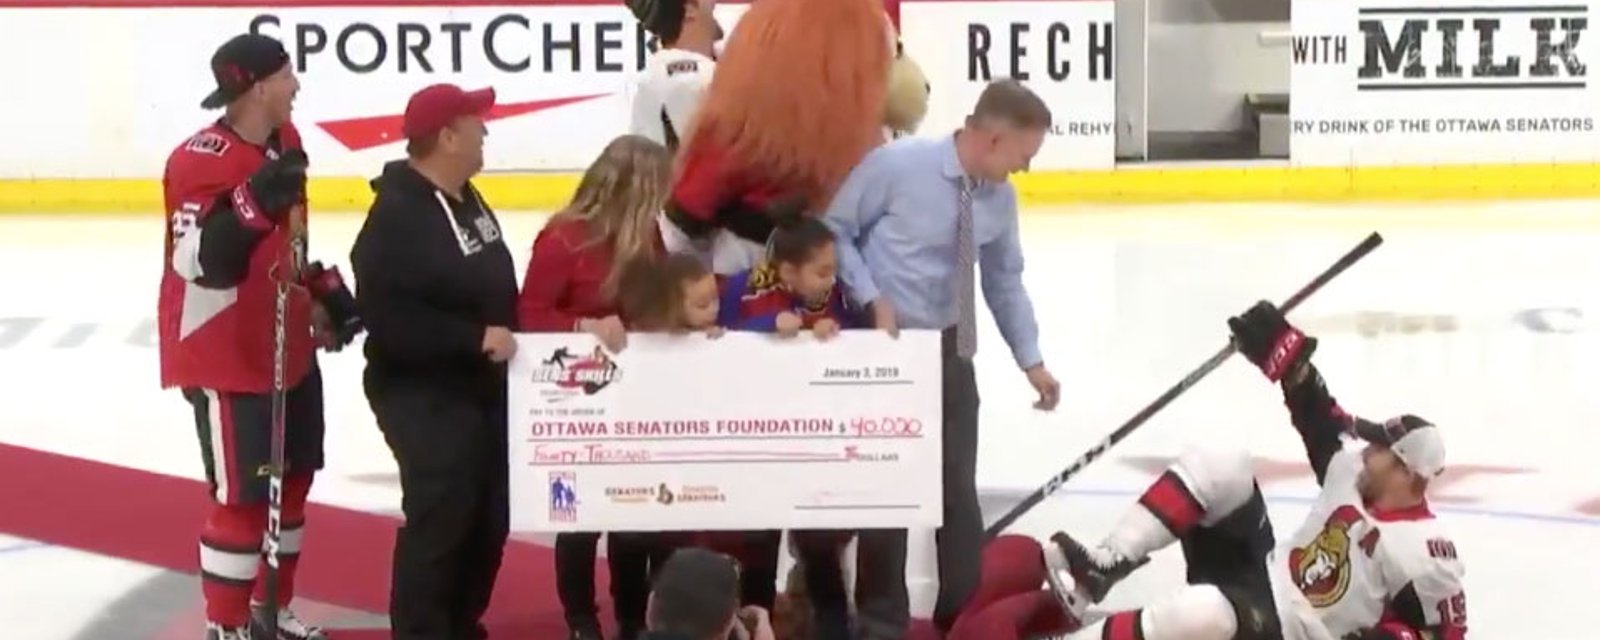 Sens' Smith wipes out on carpet at centre ice during Skills event at Canadian Tire Centre 